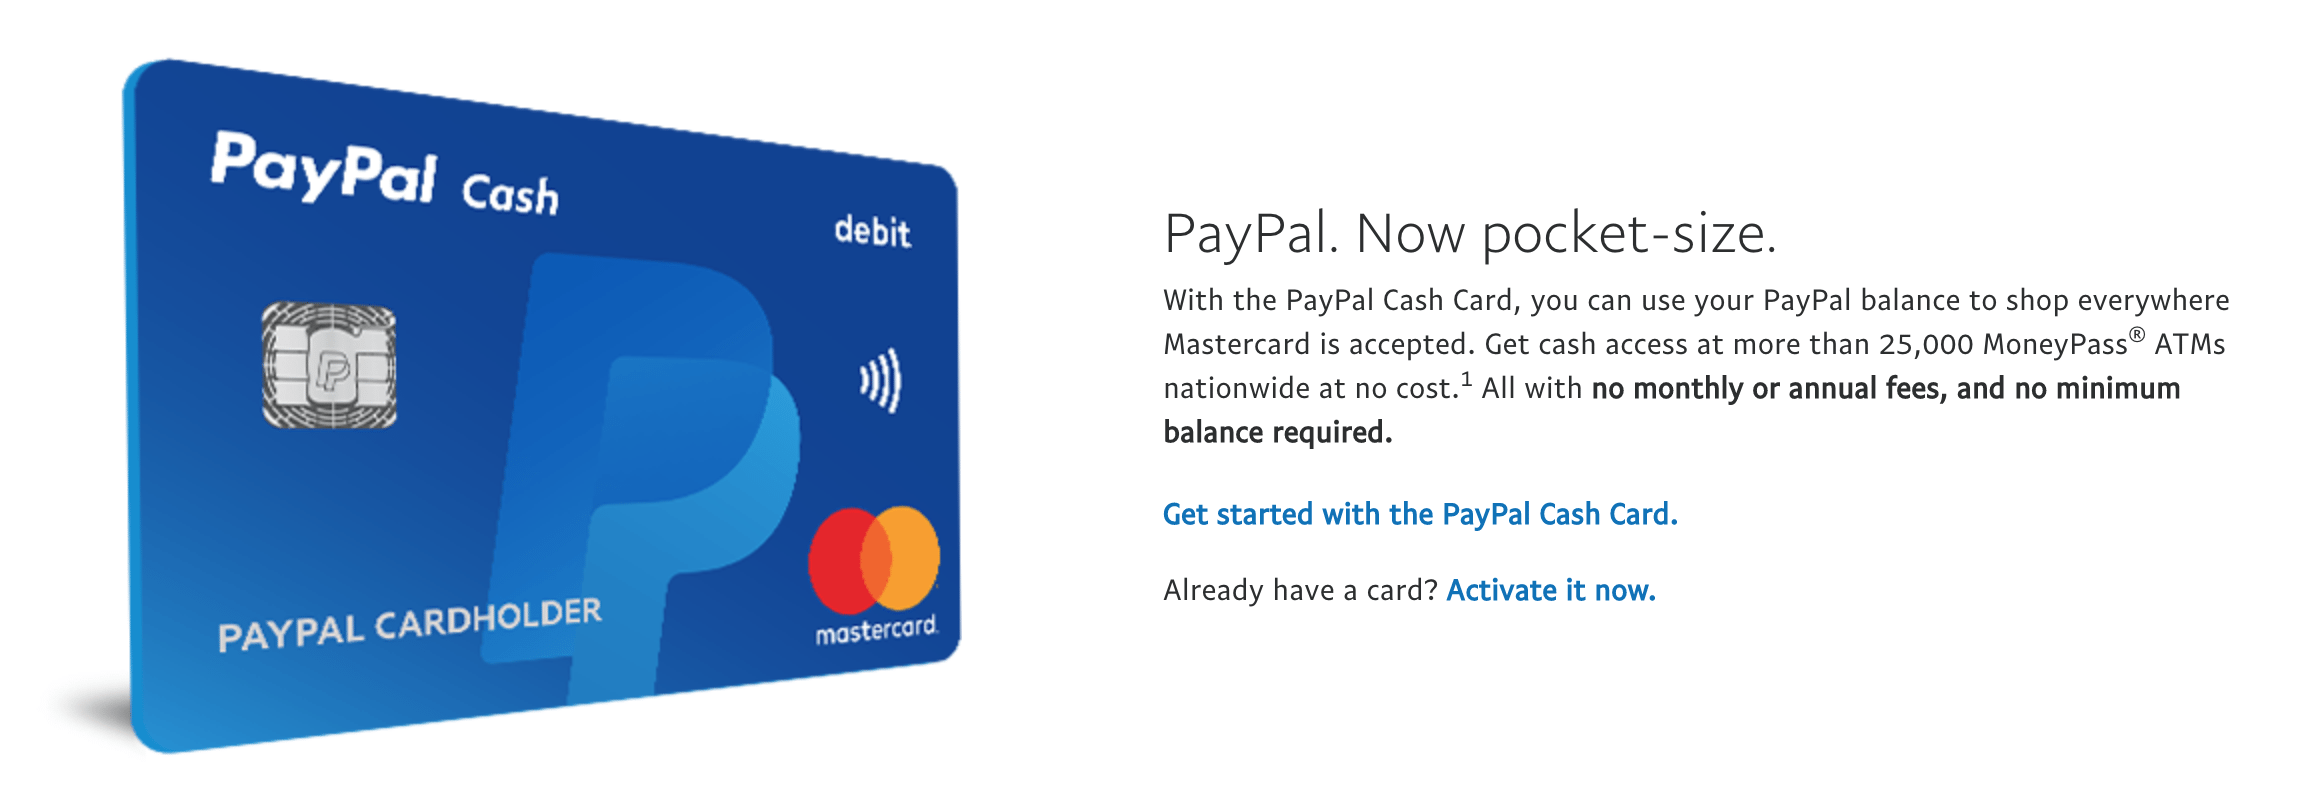 How to Activate a PayPal Cash Card and Use It to Shop